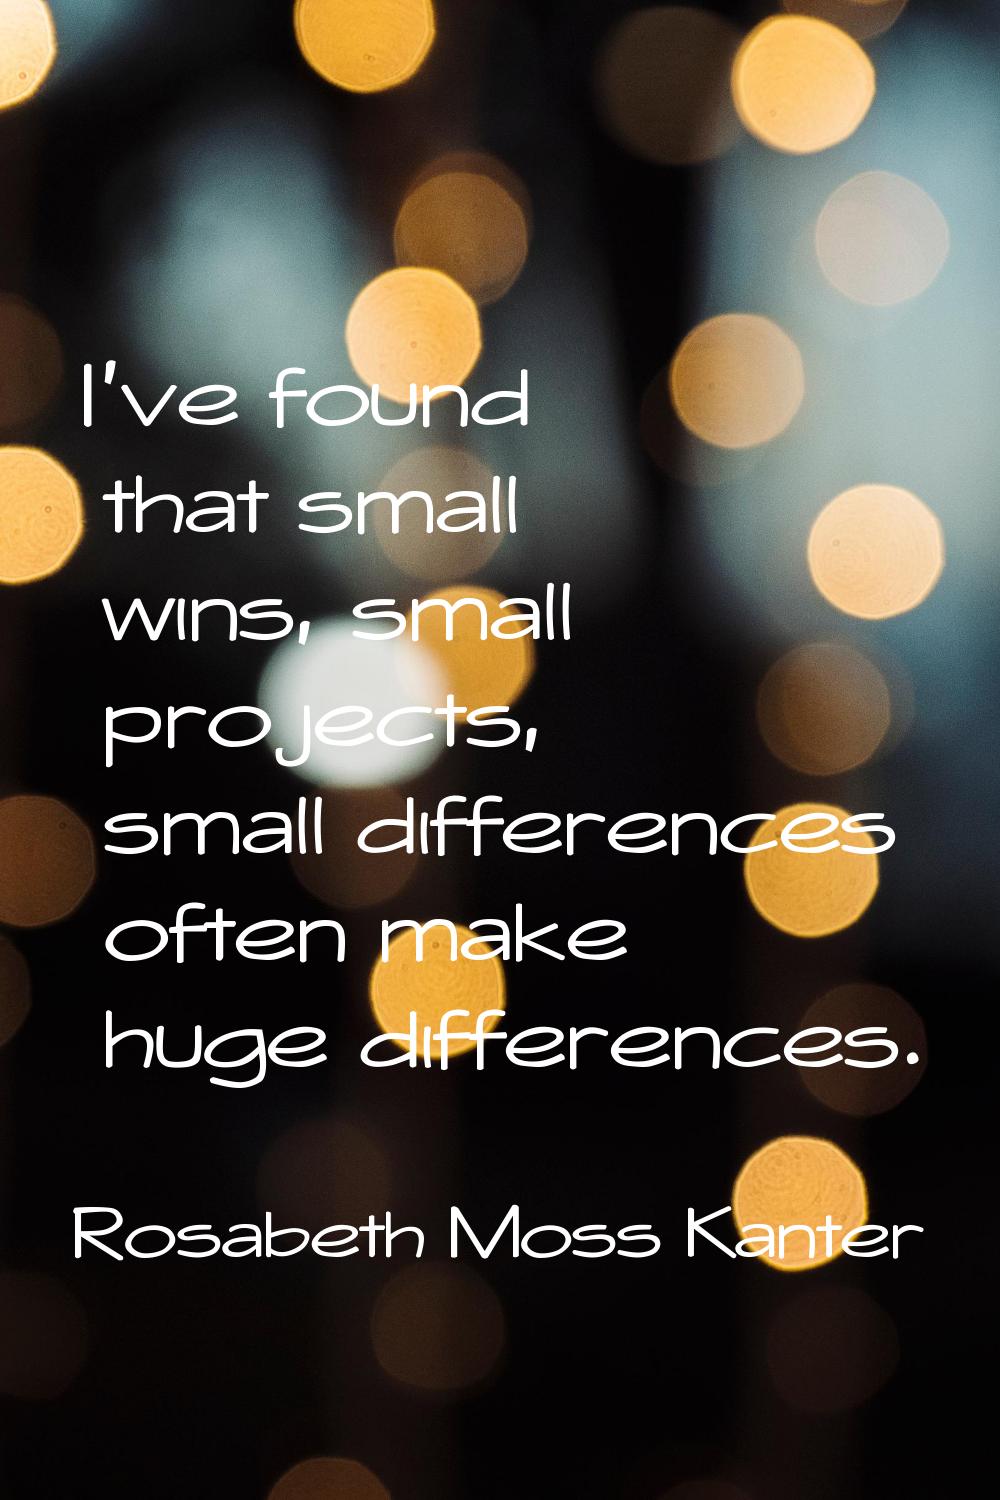 I've found that small wins, small projects, small differences often make huge differences.